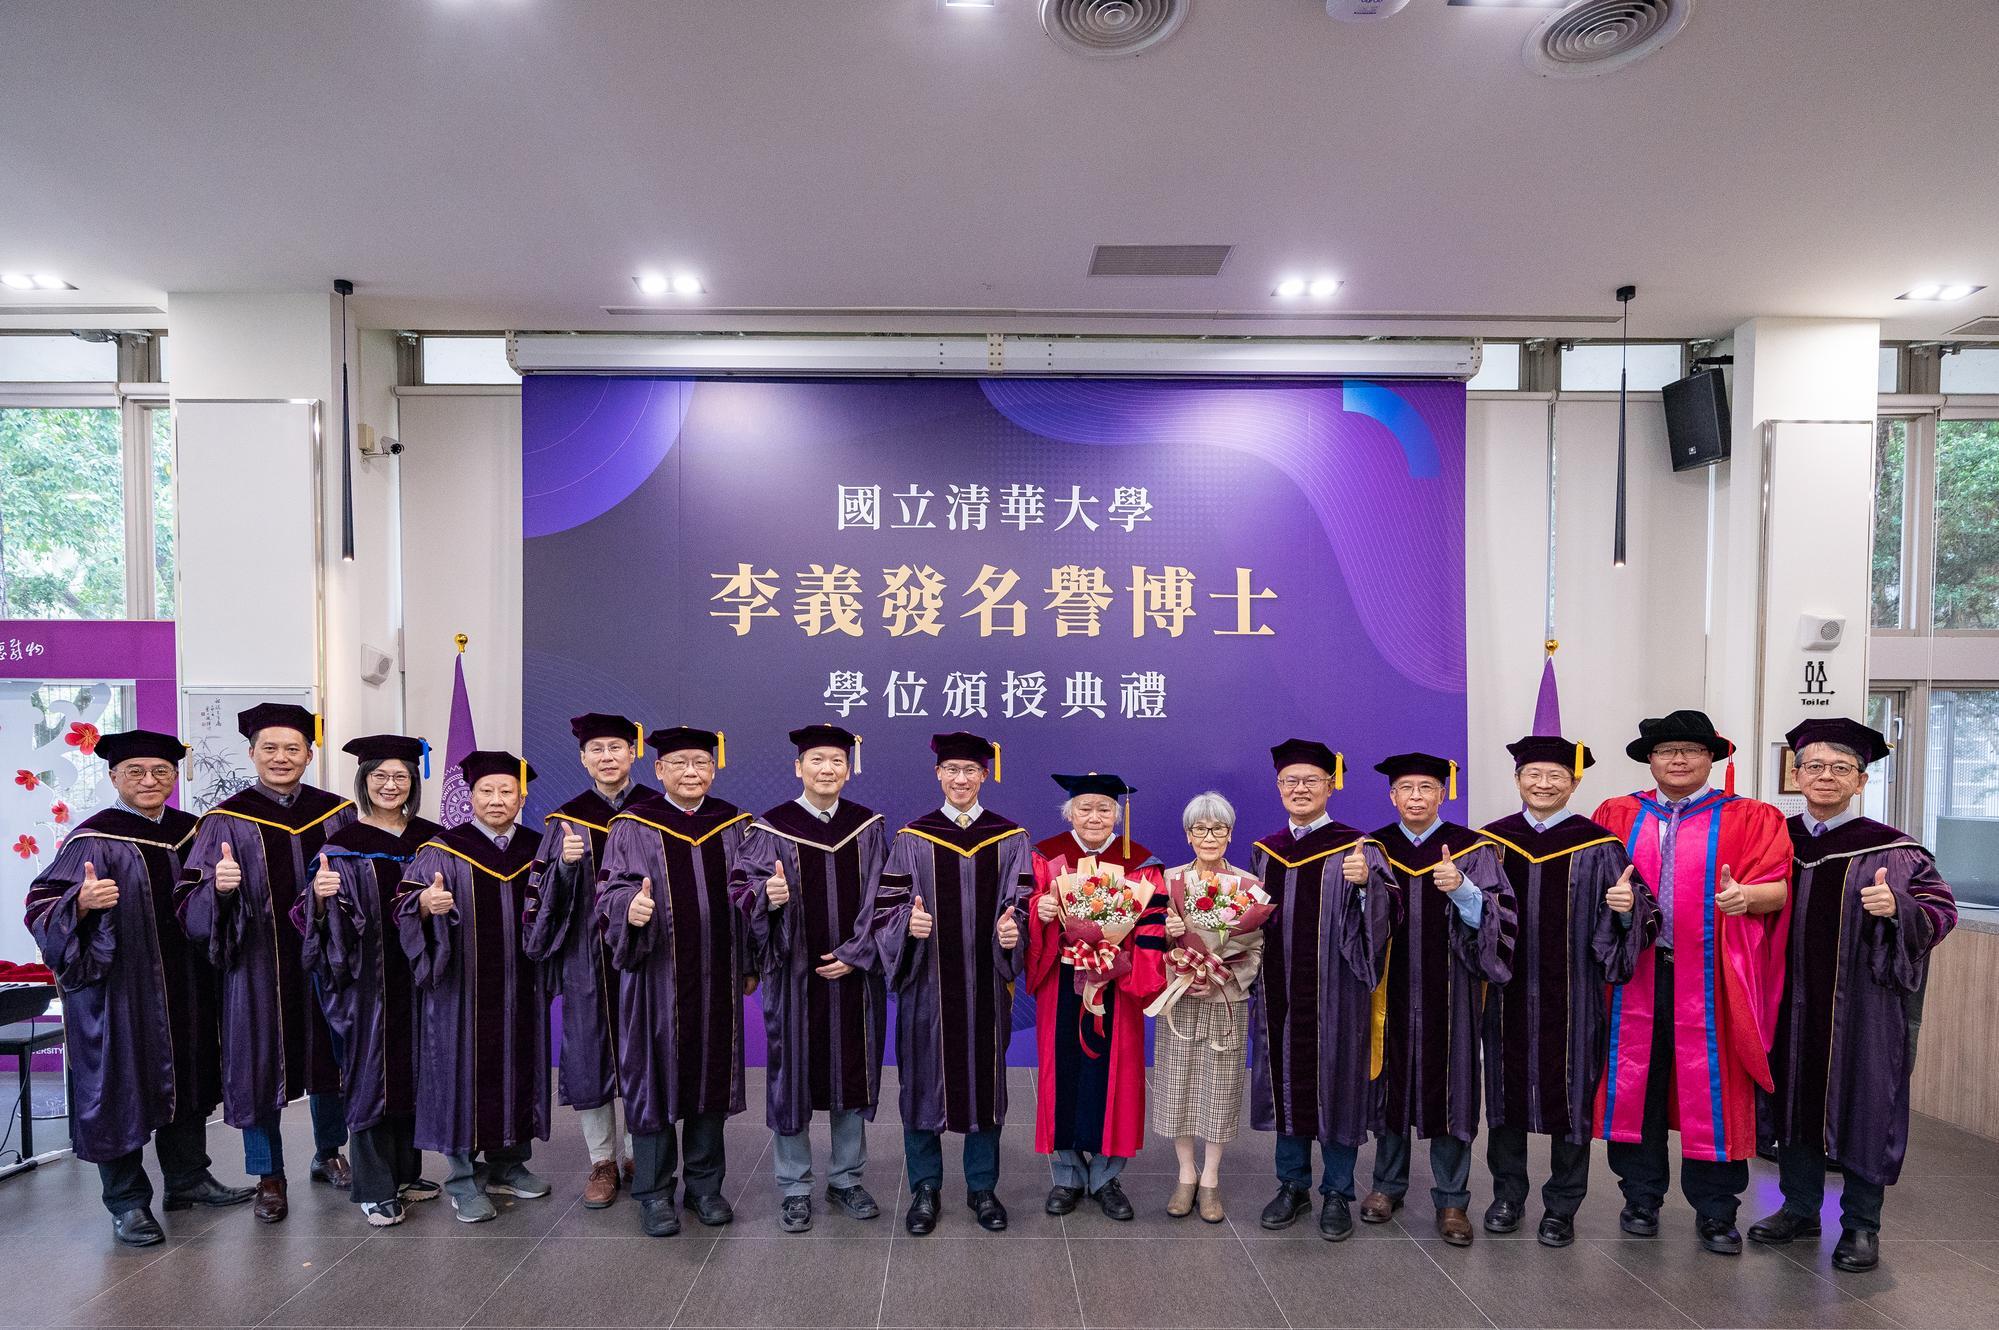 NTHU conferred an honorary doctorate upon Dr. Yi-Fa Lee (李義發) on November 14. Officials from NTHU gathered to offer their congratulations.